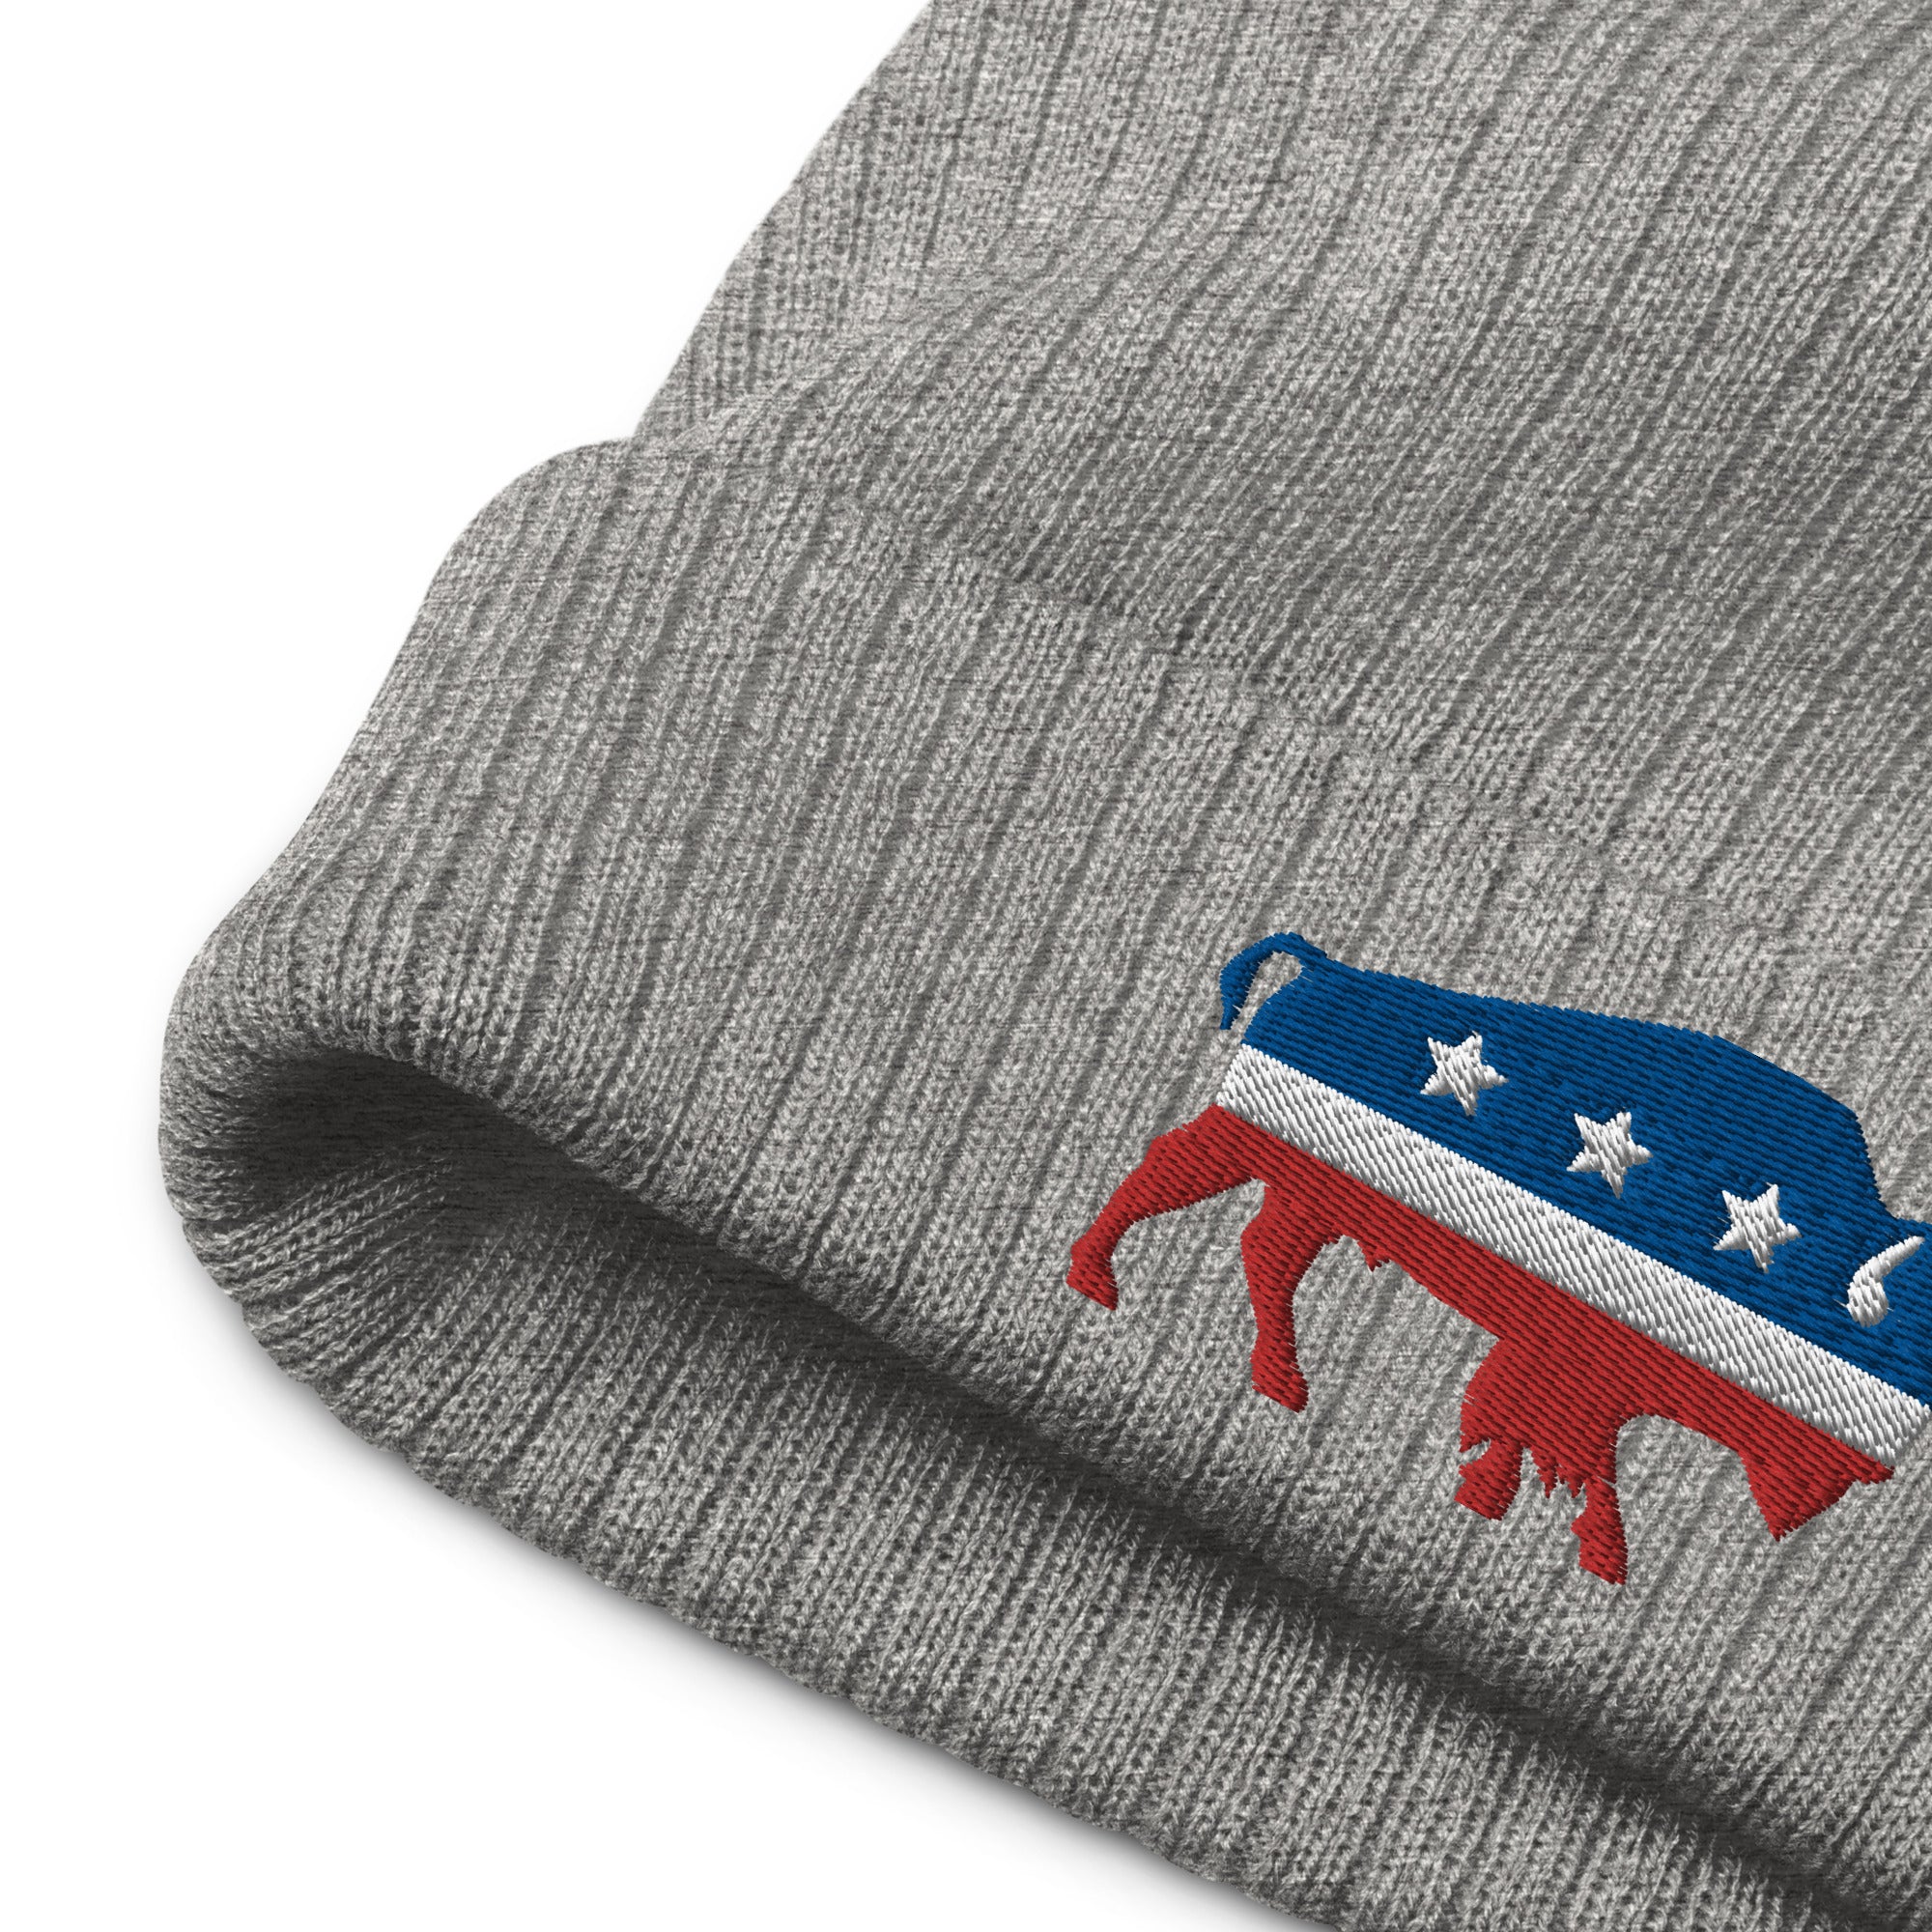 American Bison Independent Ribbed Knit Beanie